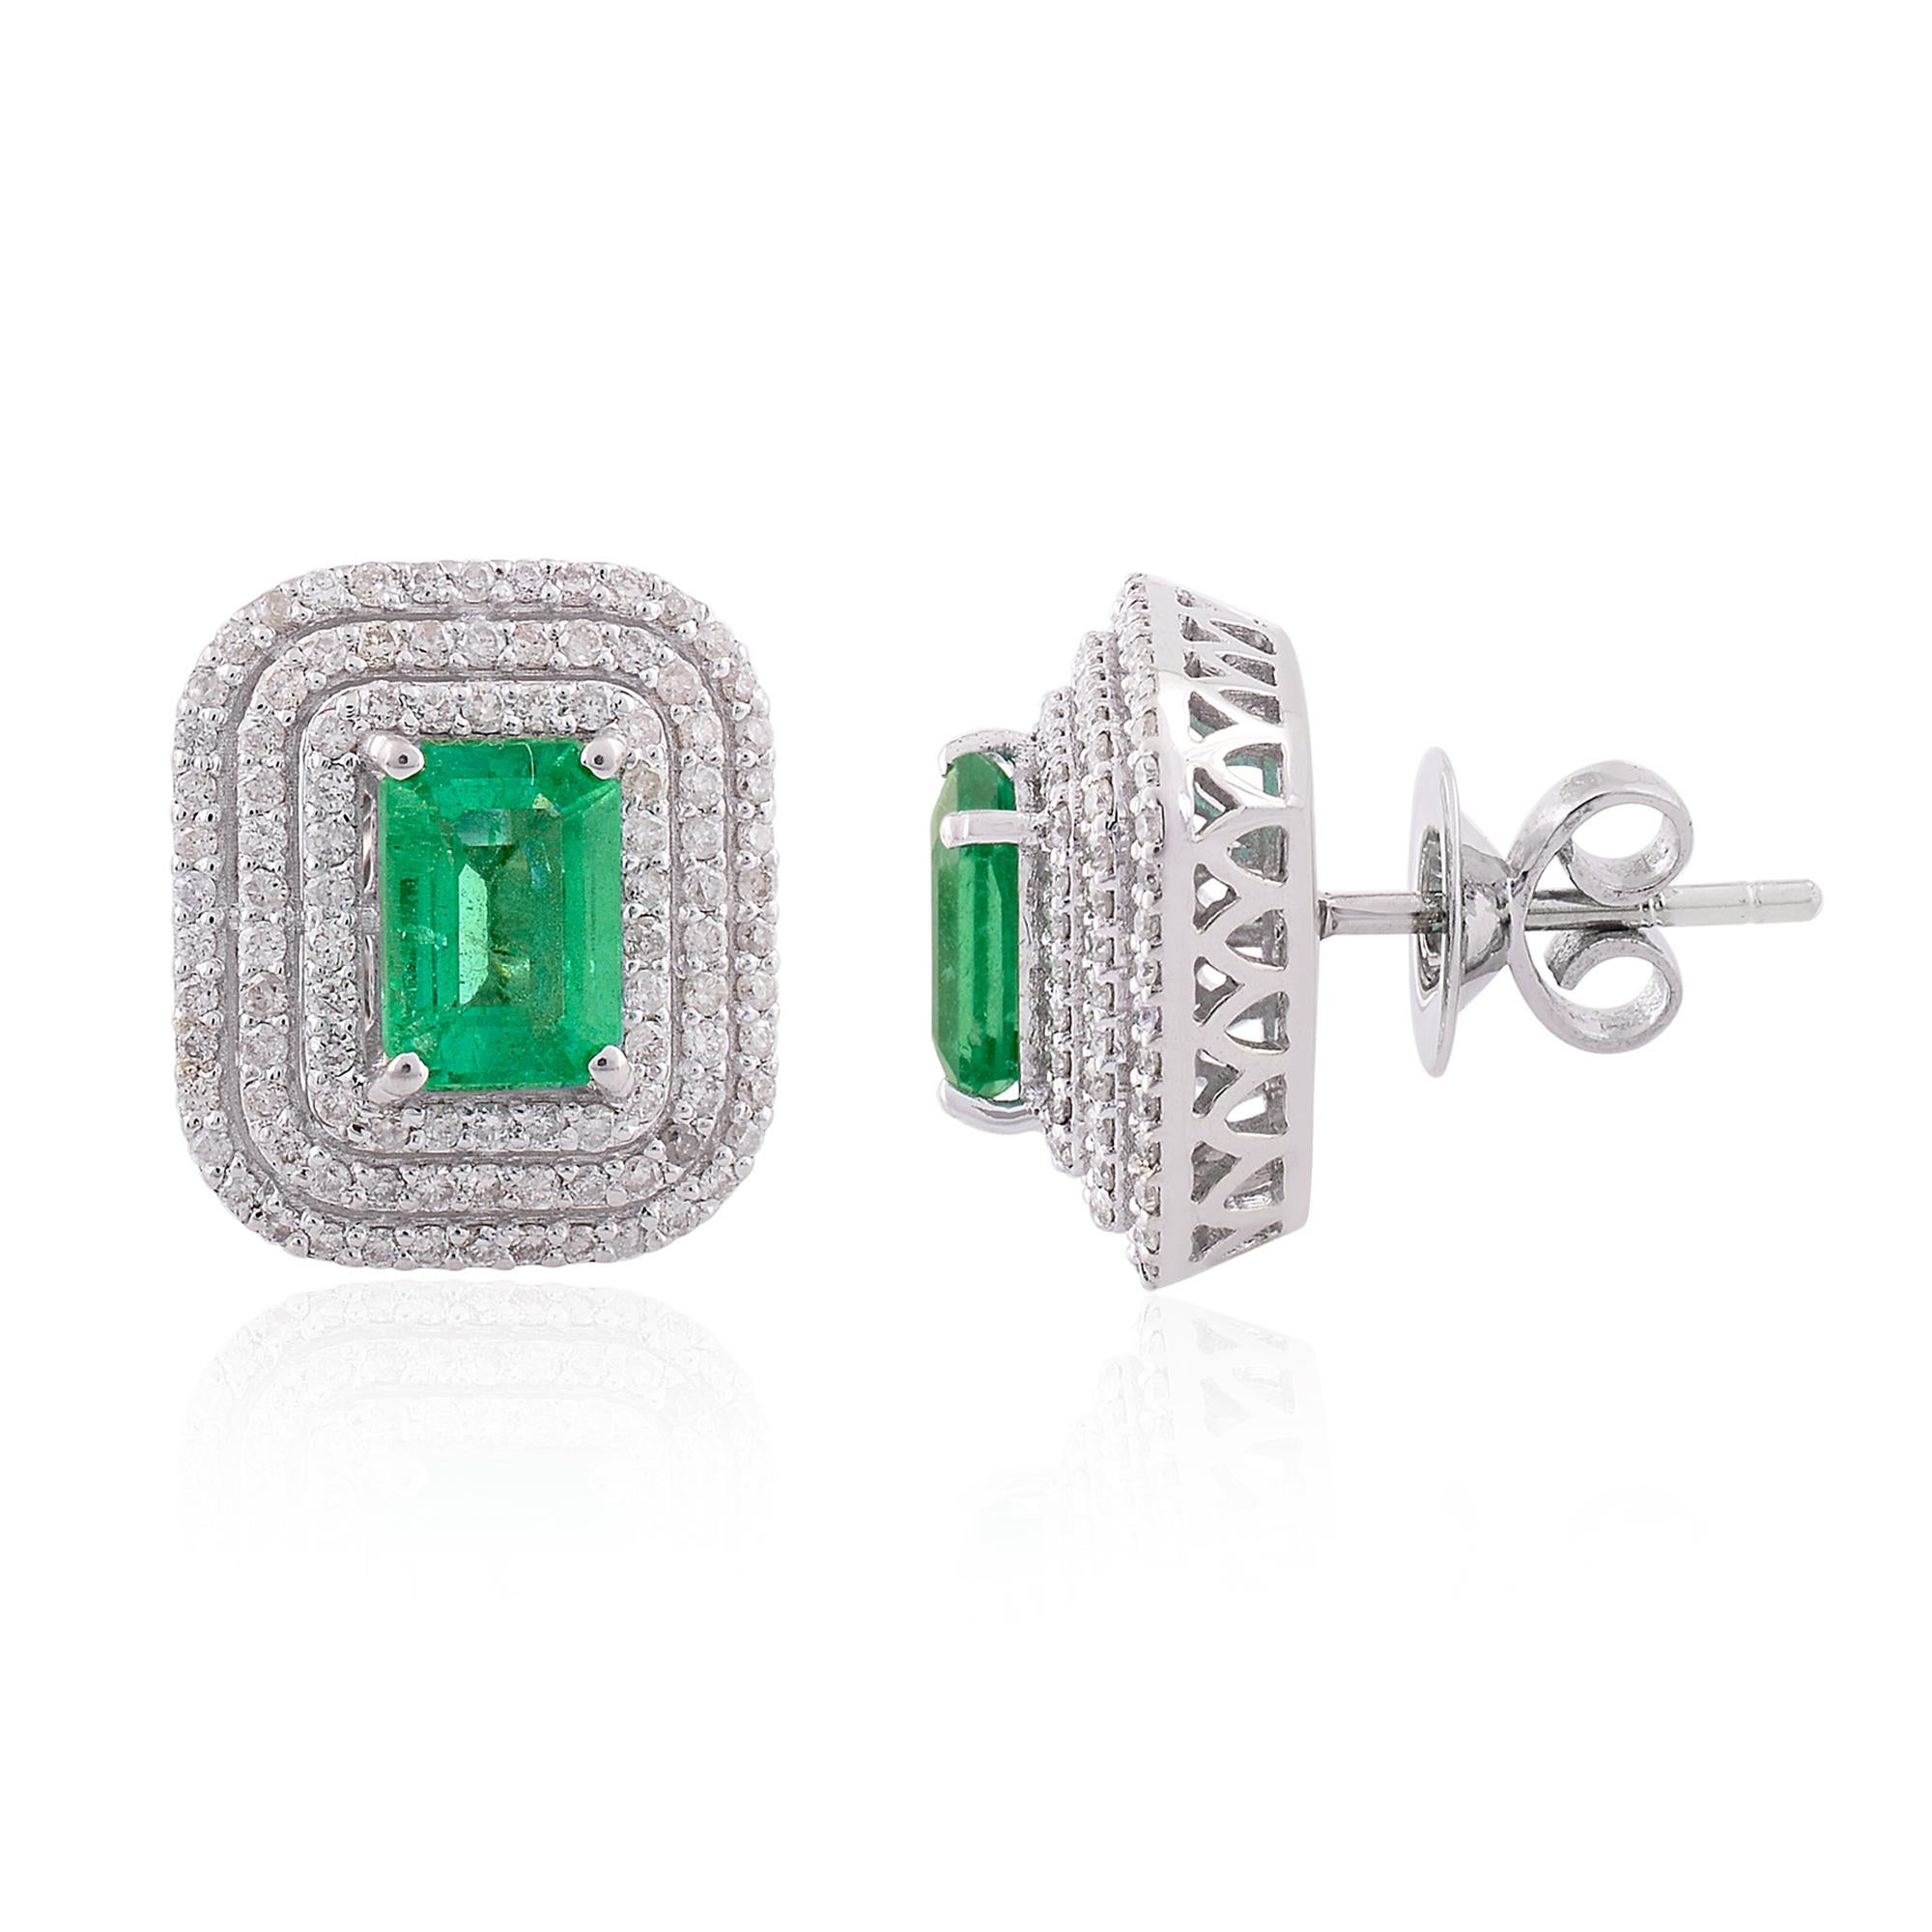 Item Code :- SEE-1416B
Gross Wt. :- 5.82 gm
18k Solid White Gold Wt. :- 5.32 gm
Natural Diamond Wt. :- 0.63 ct.  ( AVERAGE DIAMOND CLARITY SI1-SI2 & COLOR H-I )
Zambian Emerald Wt. :- 1.86 ct.
Earrings Size :- 15x12 mm approx.

✦